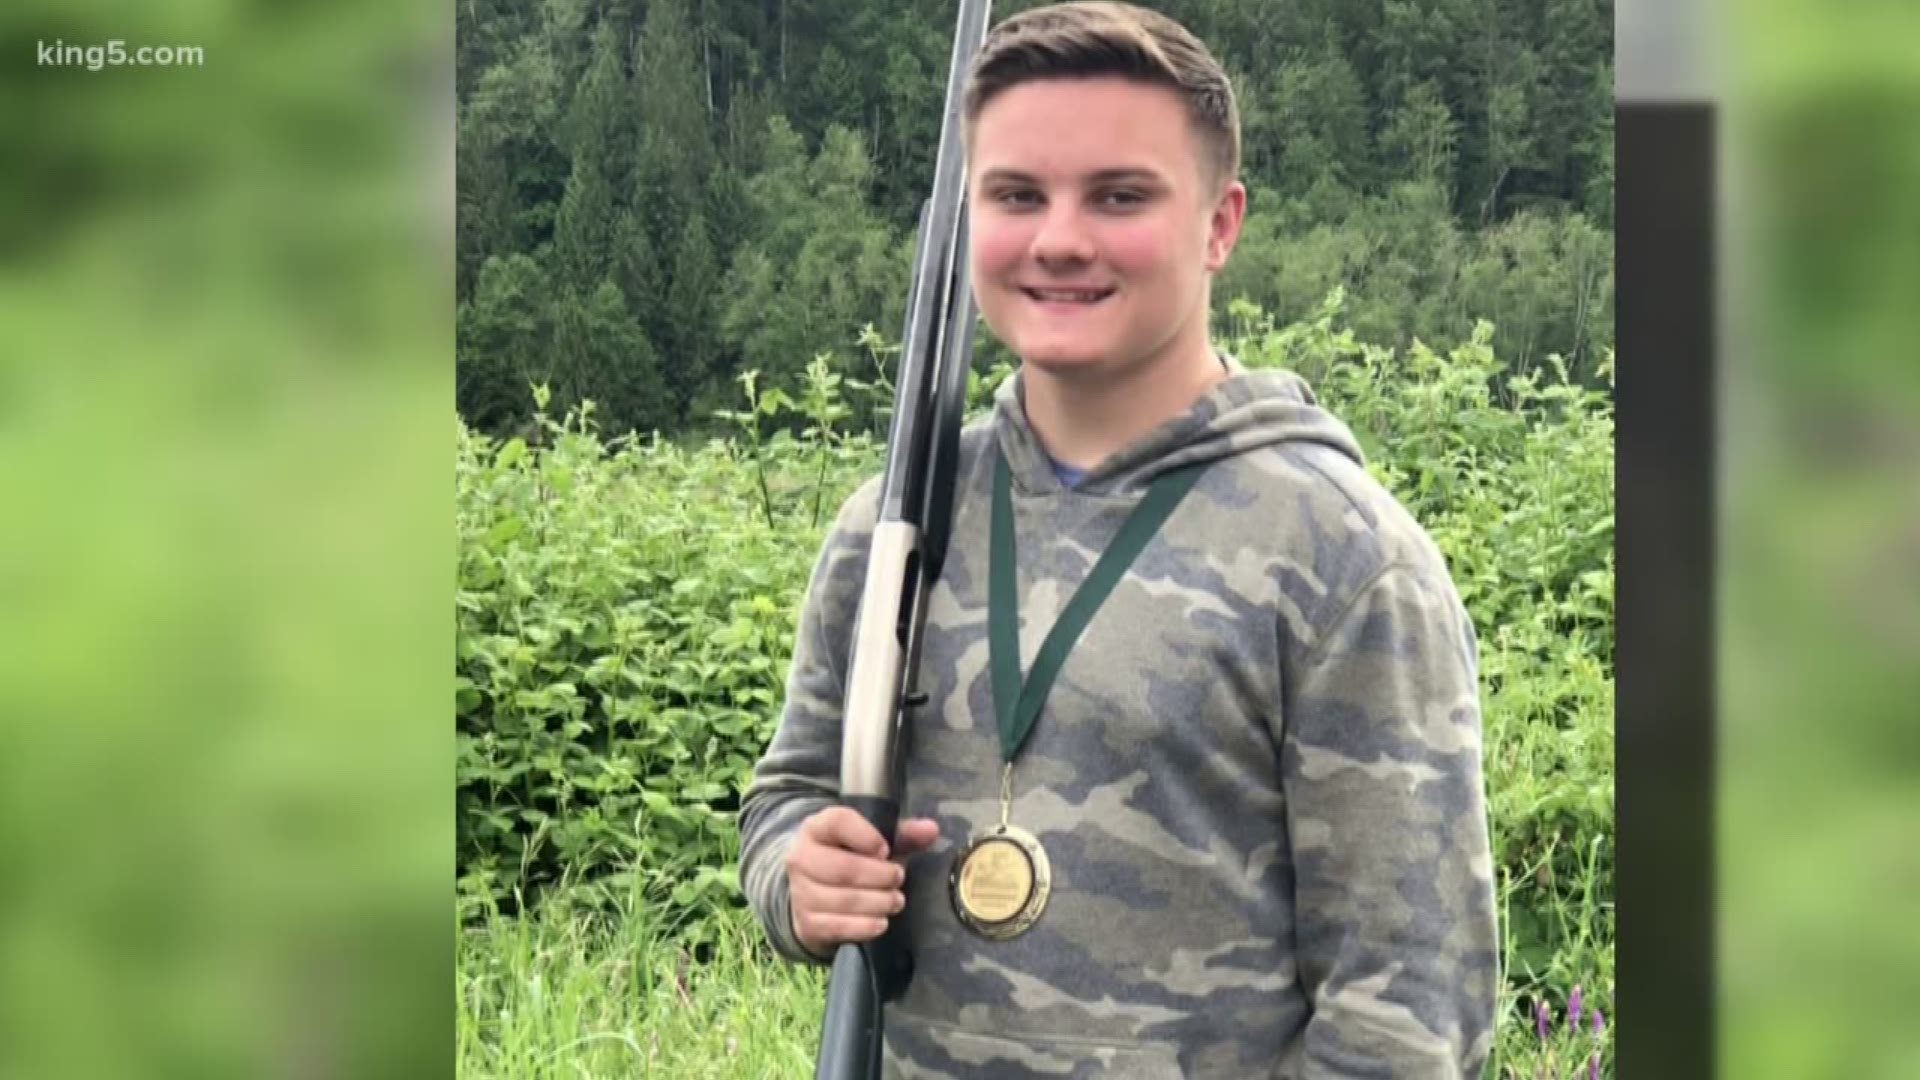 Skeet shooting has been an Olympic event since 1968 and in this week's Prep Zone, KING 5's Chris Egan headed to Eatonville where he found two shooters that dream of one day representing the U.S.